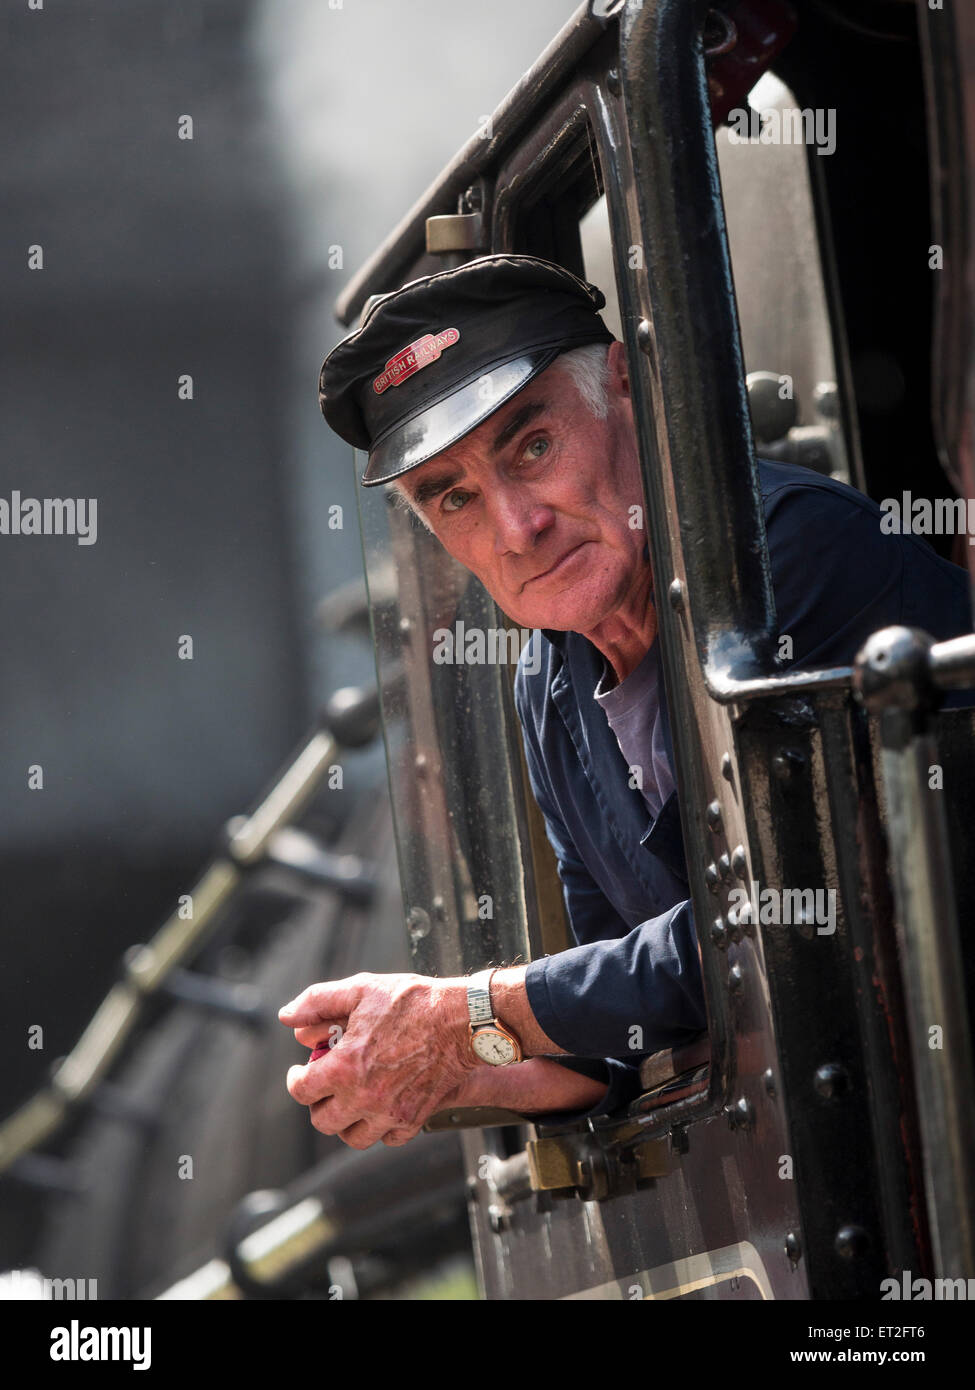 engine driver of a vintage steam locomotive at Loughborough station, on the Great Central Railway in Leicestershire,UK Stock Photo